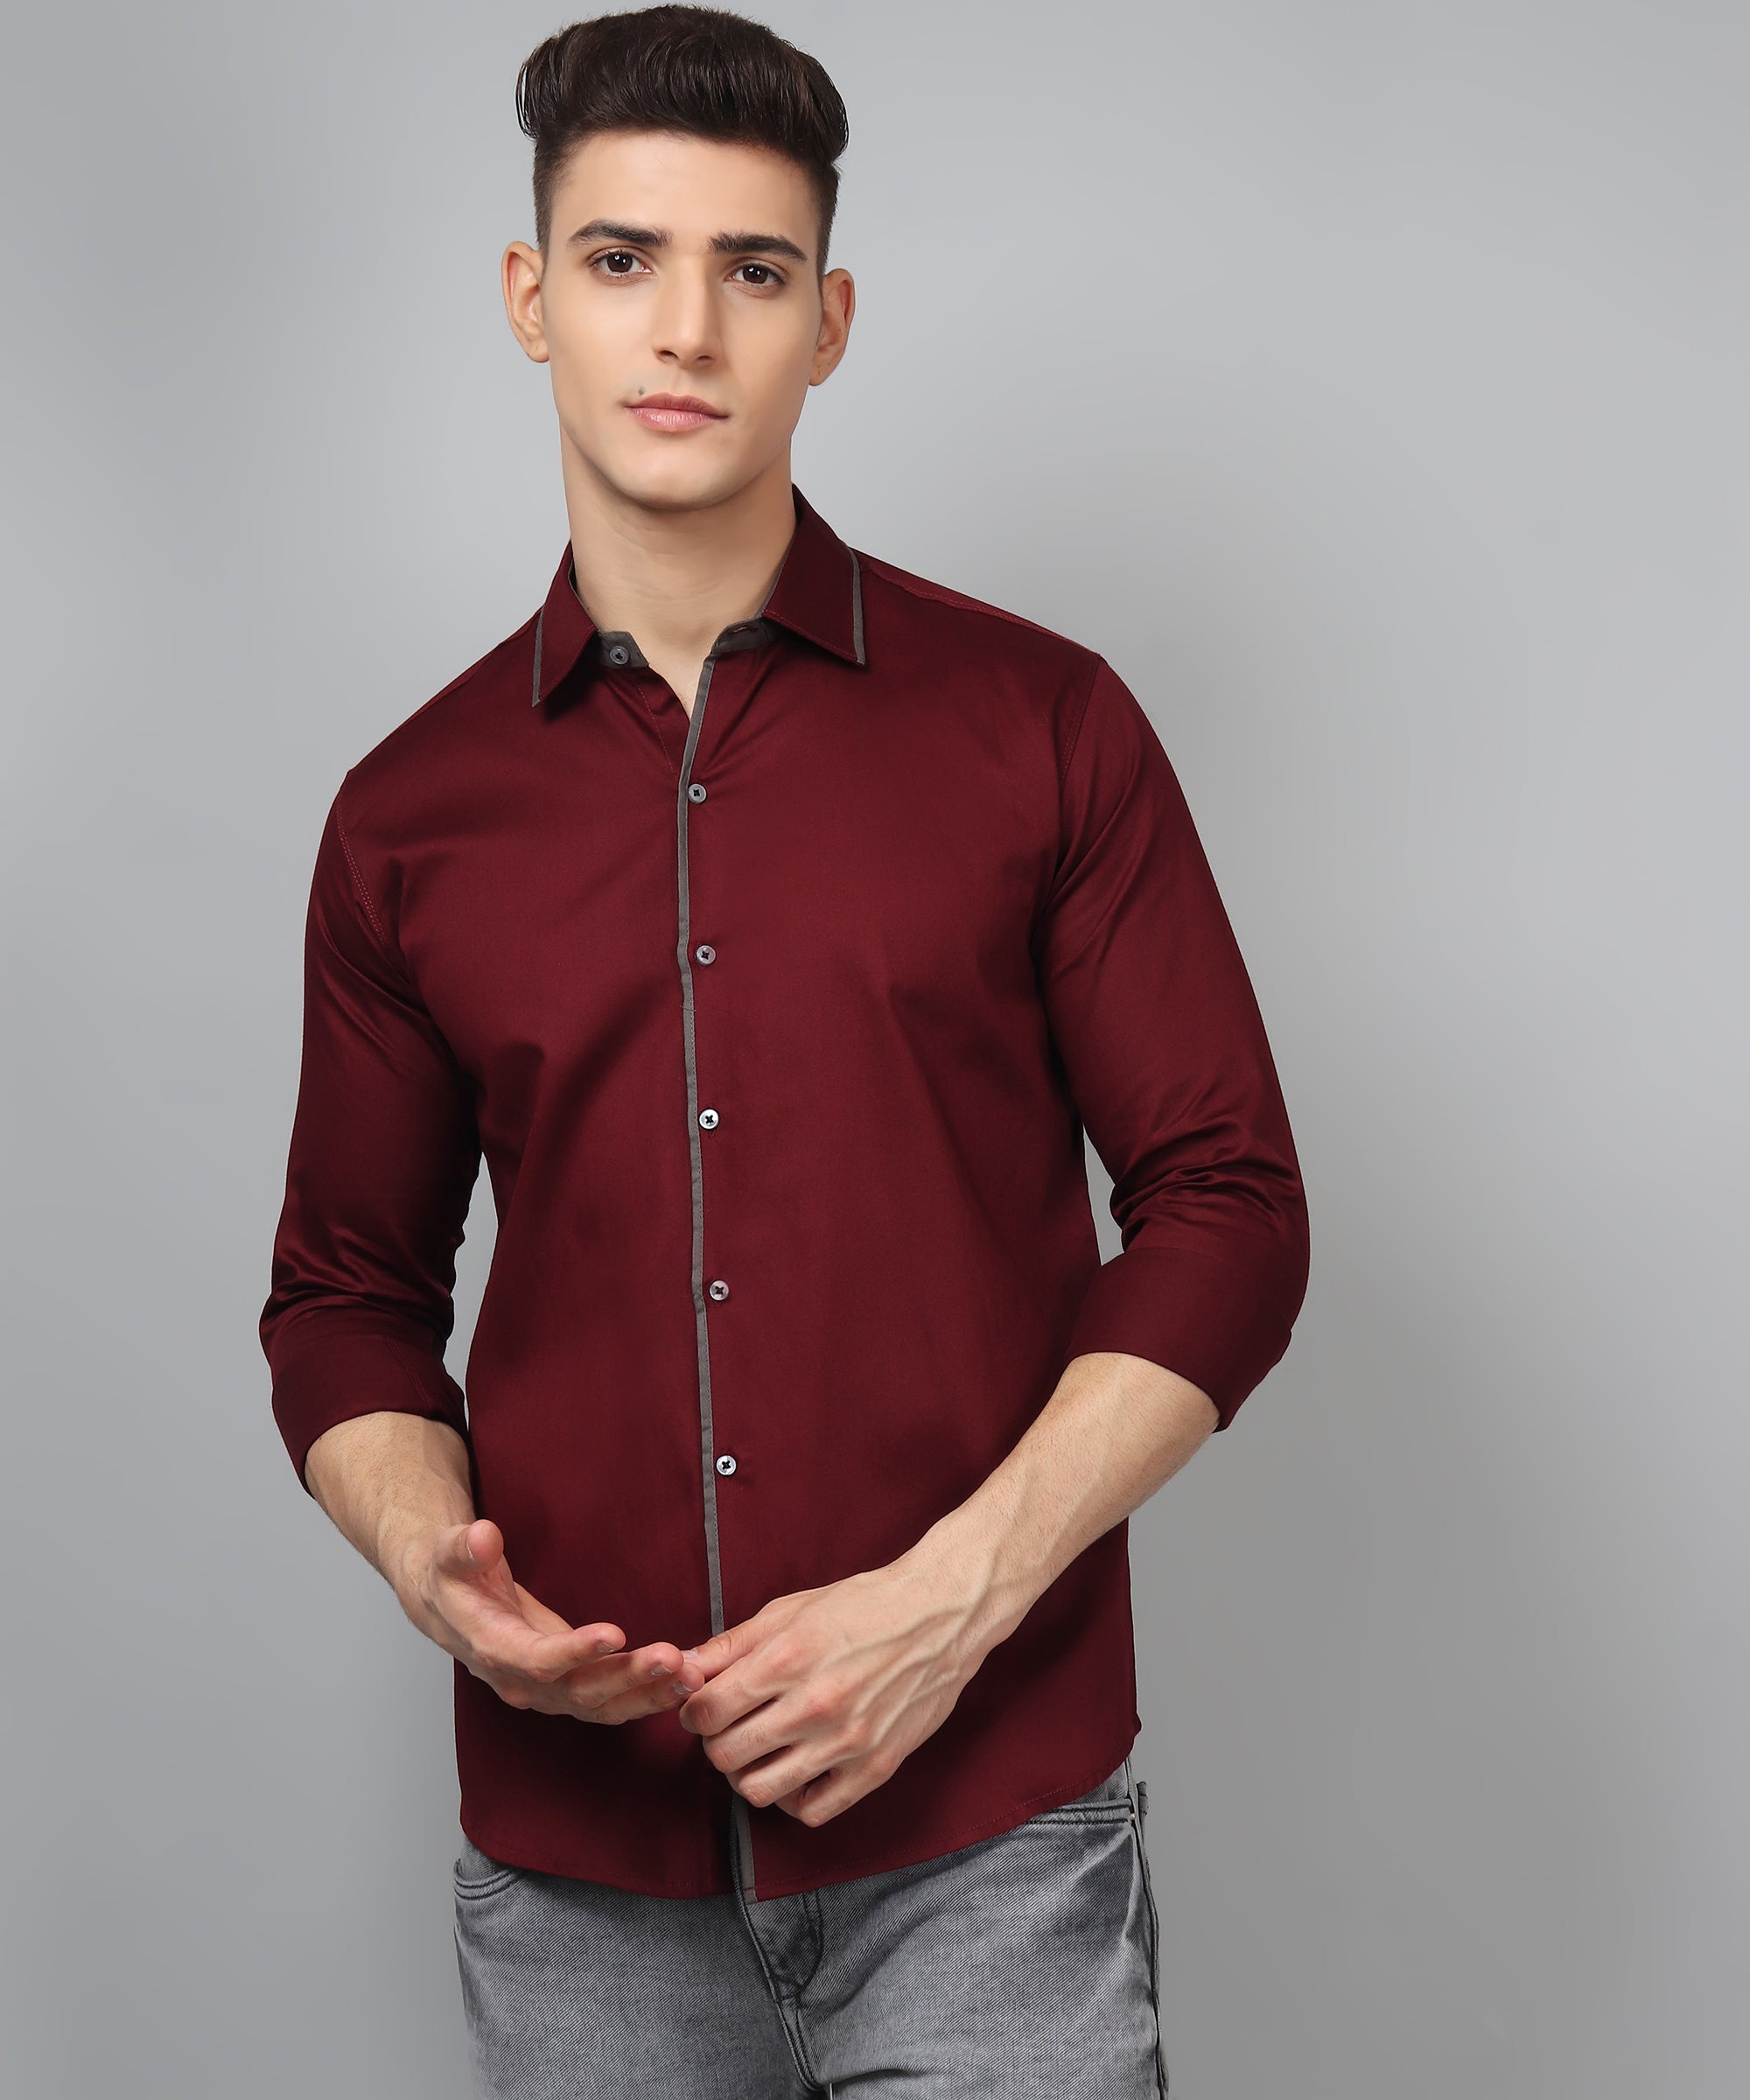 Pinpoint Precision: Elevating Style with Pinpoint Fabric Shirts